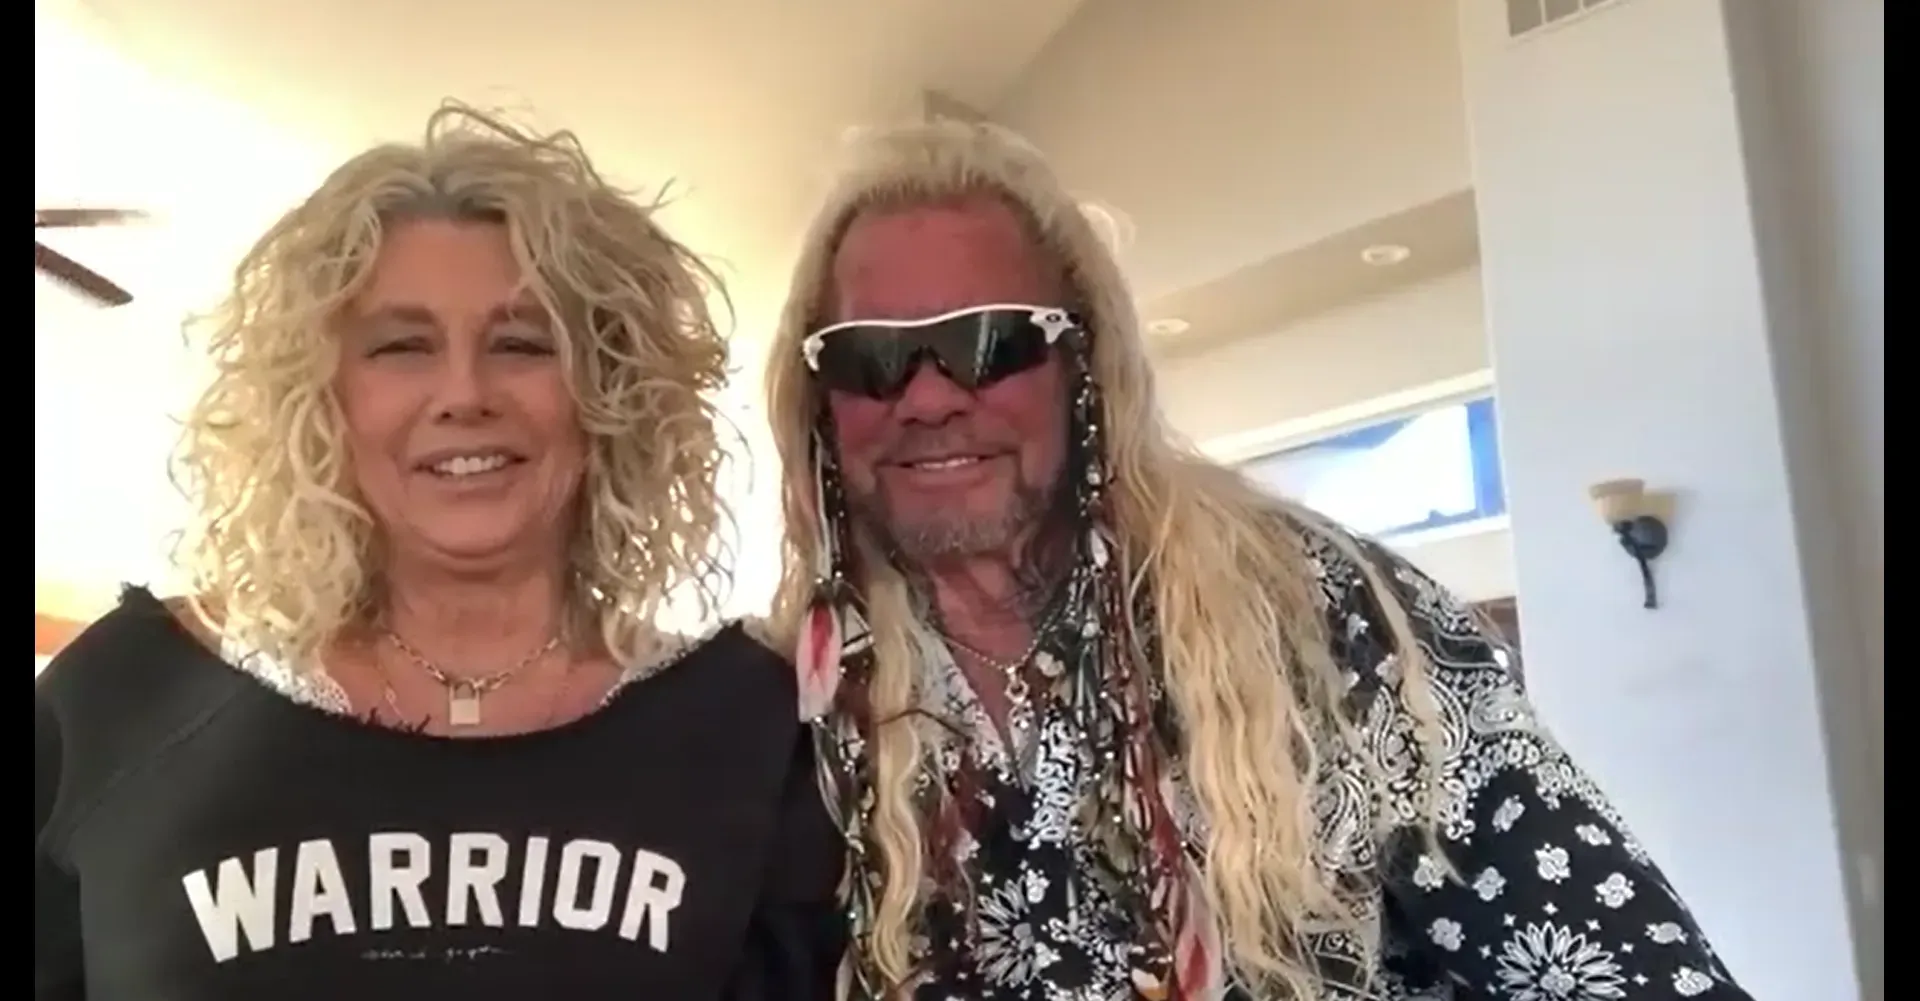 Dog the Bounty Hunter and his wife Francie Frane